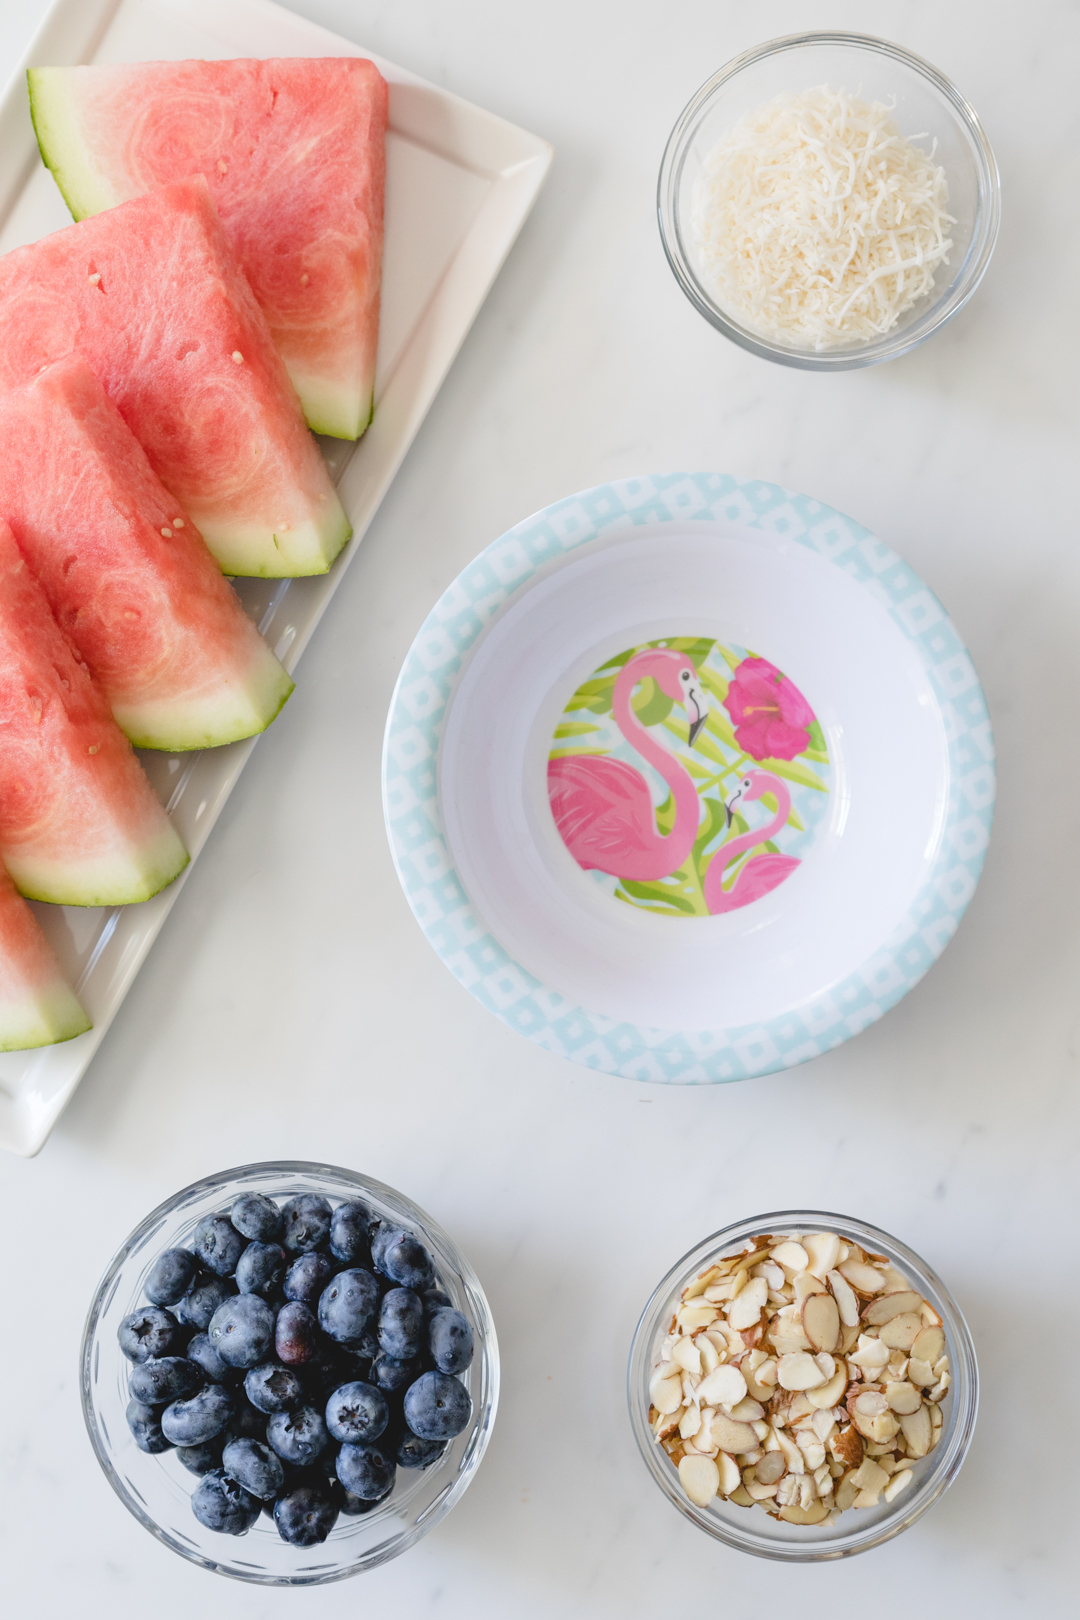 Watermelon Power Bowls. Delish way to start the day or enjoy a nutrient loaded snack.